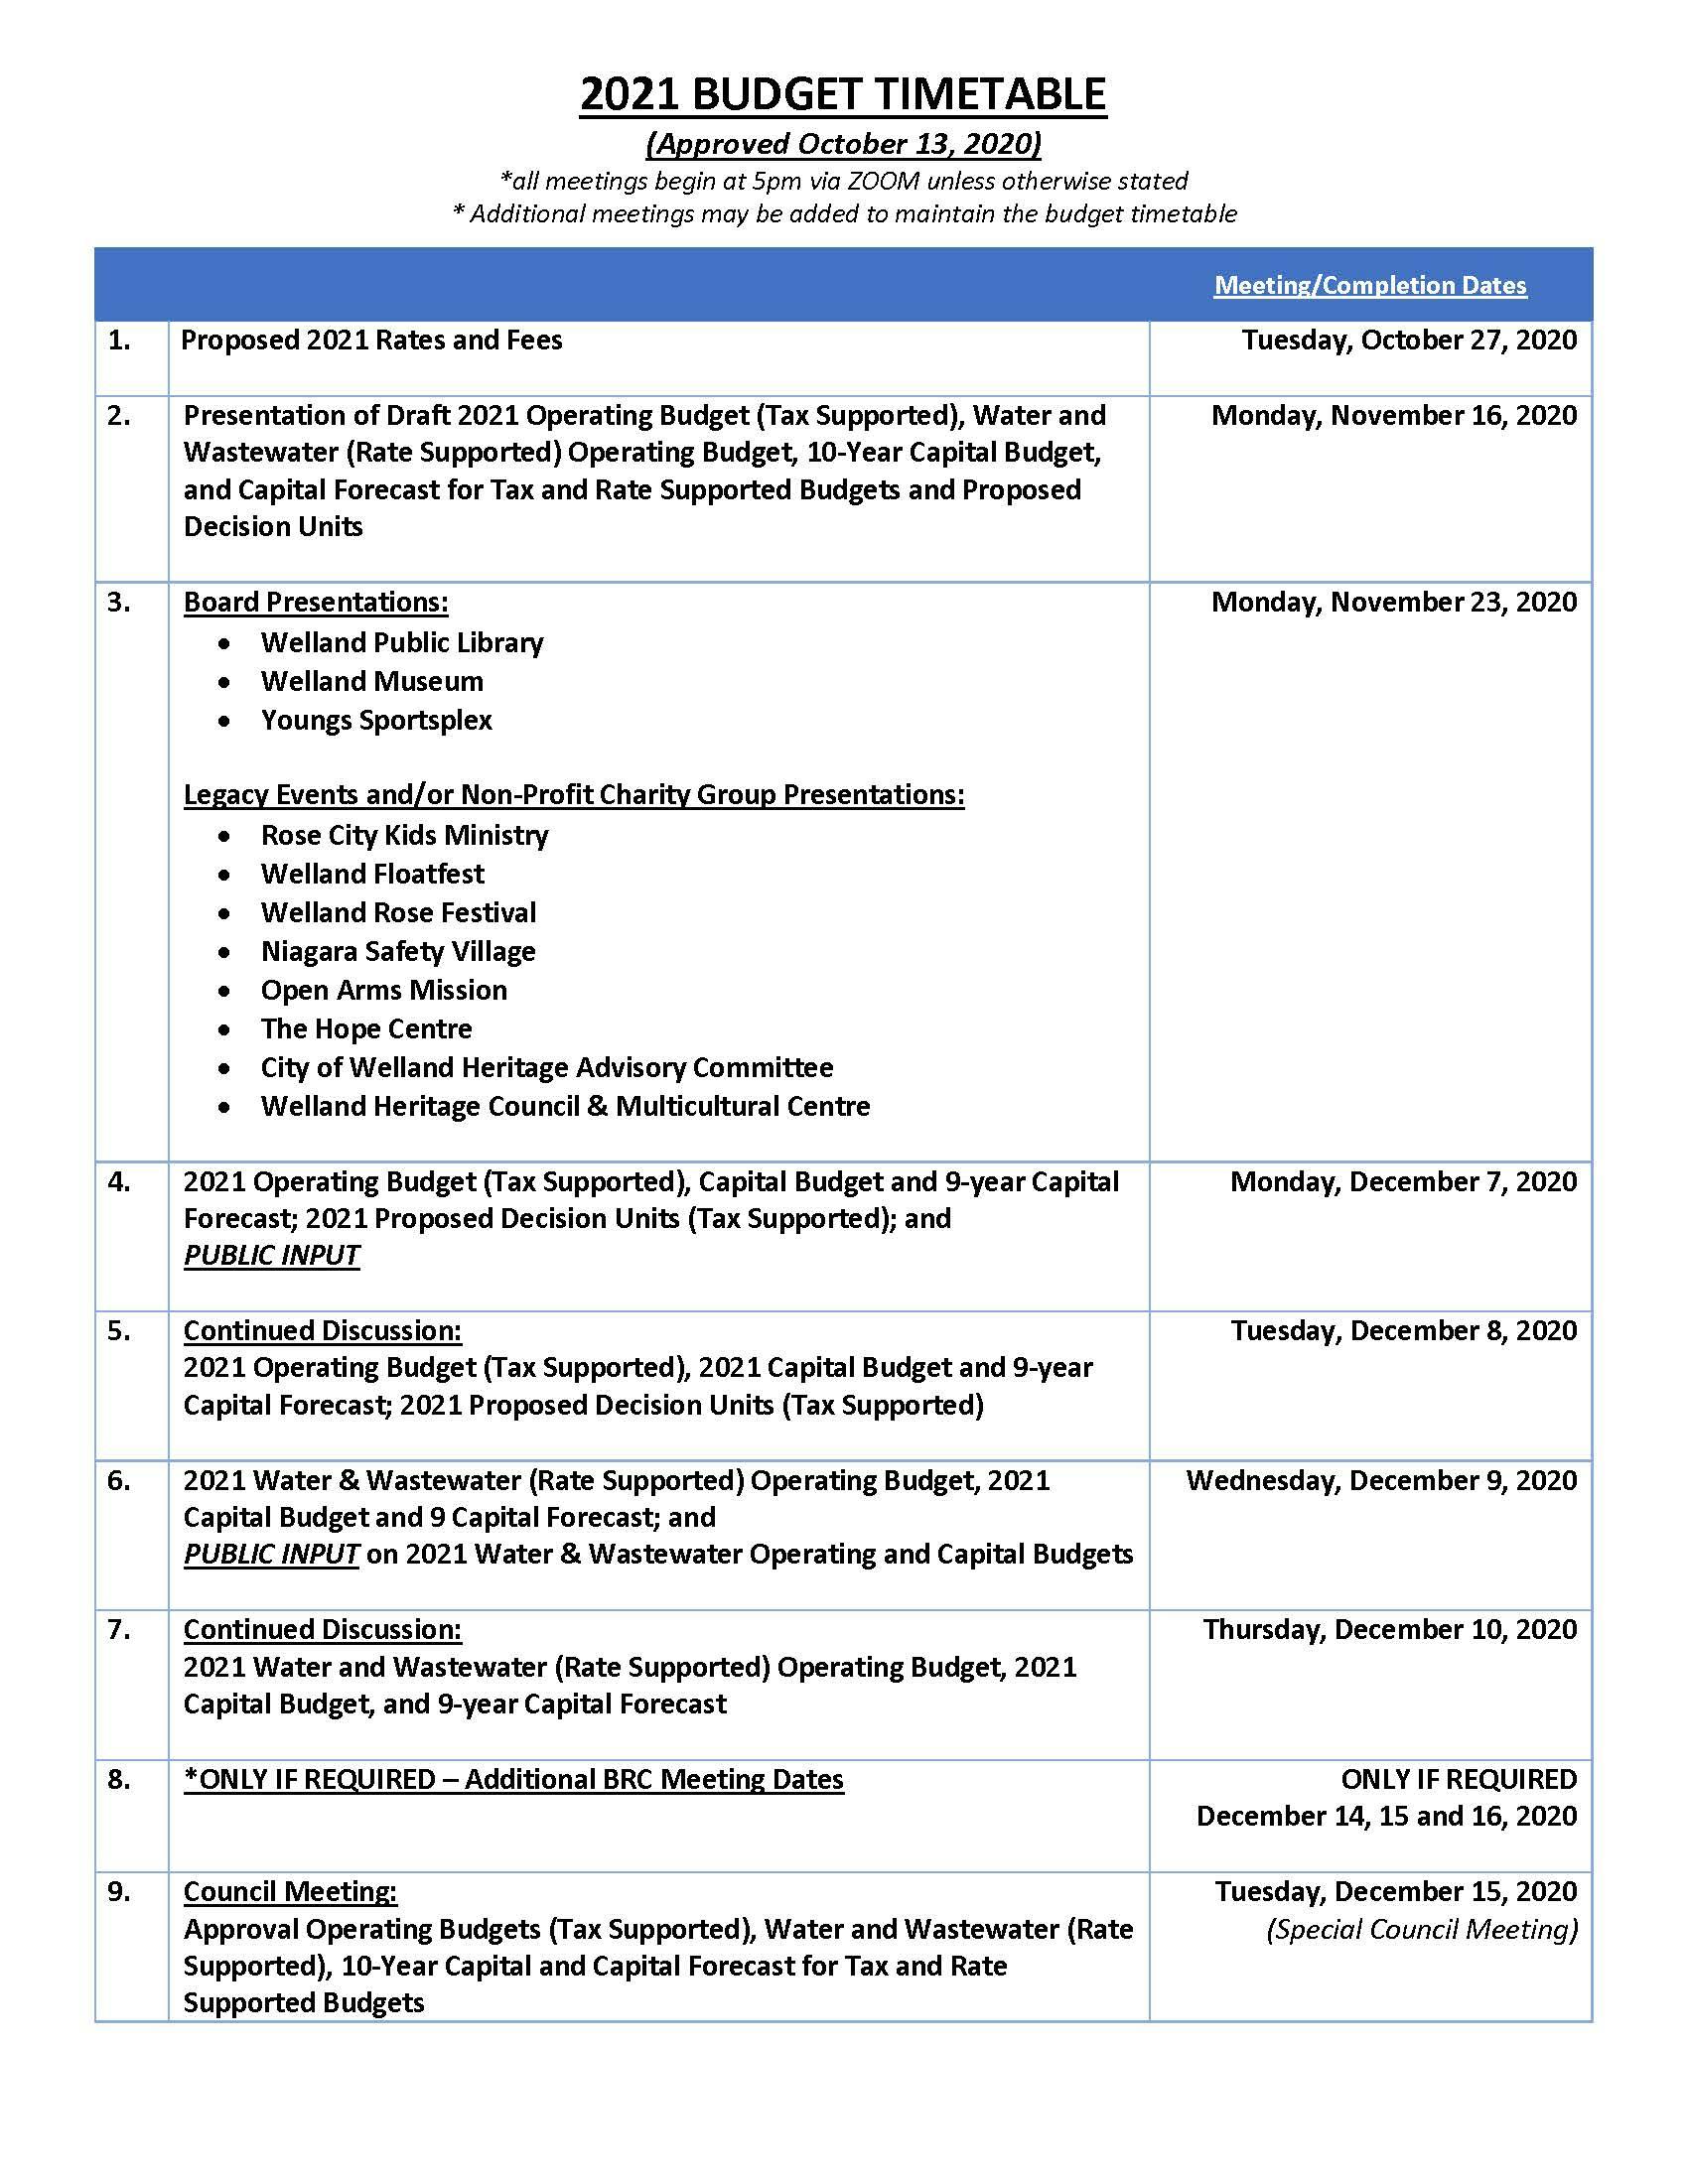 BUDGET TIMETABLE - approved Oct 13 2020.jpg